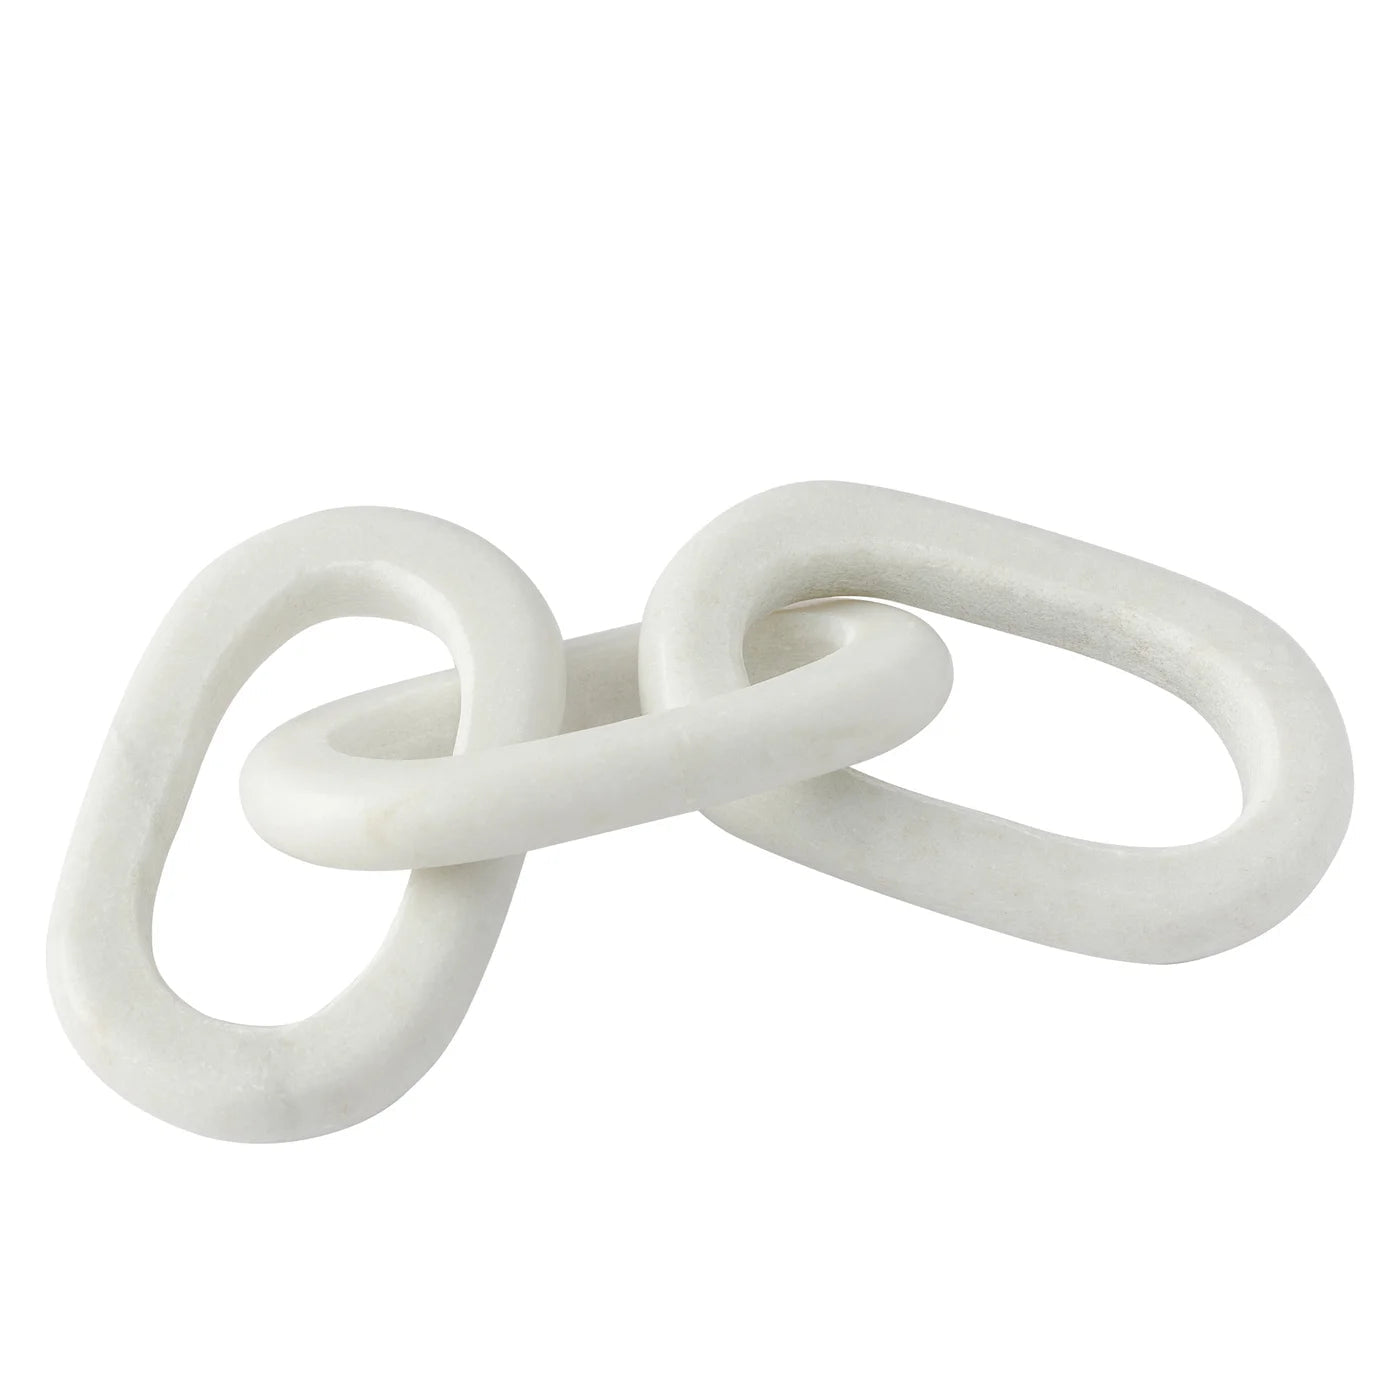 Marble Chain Links Sculpture - white